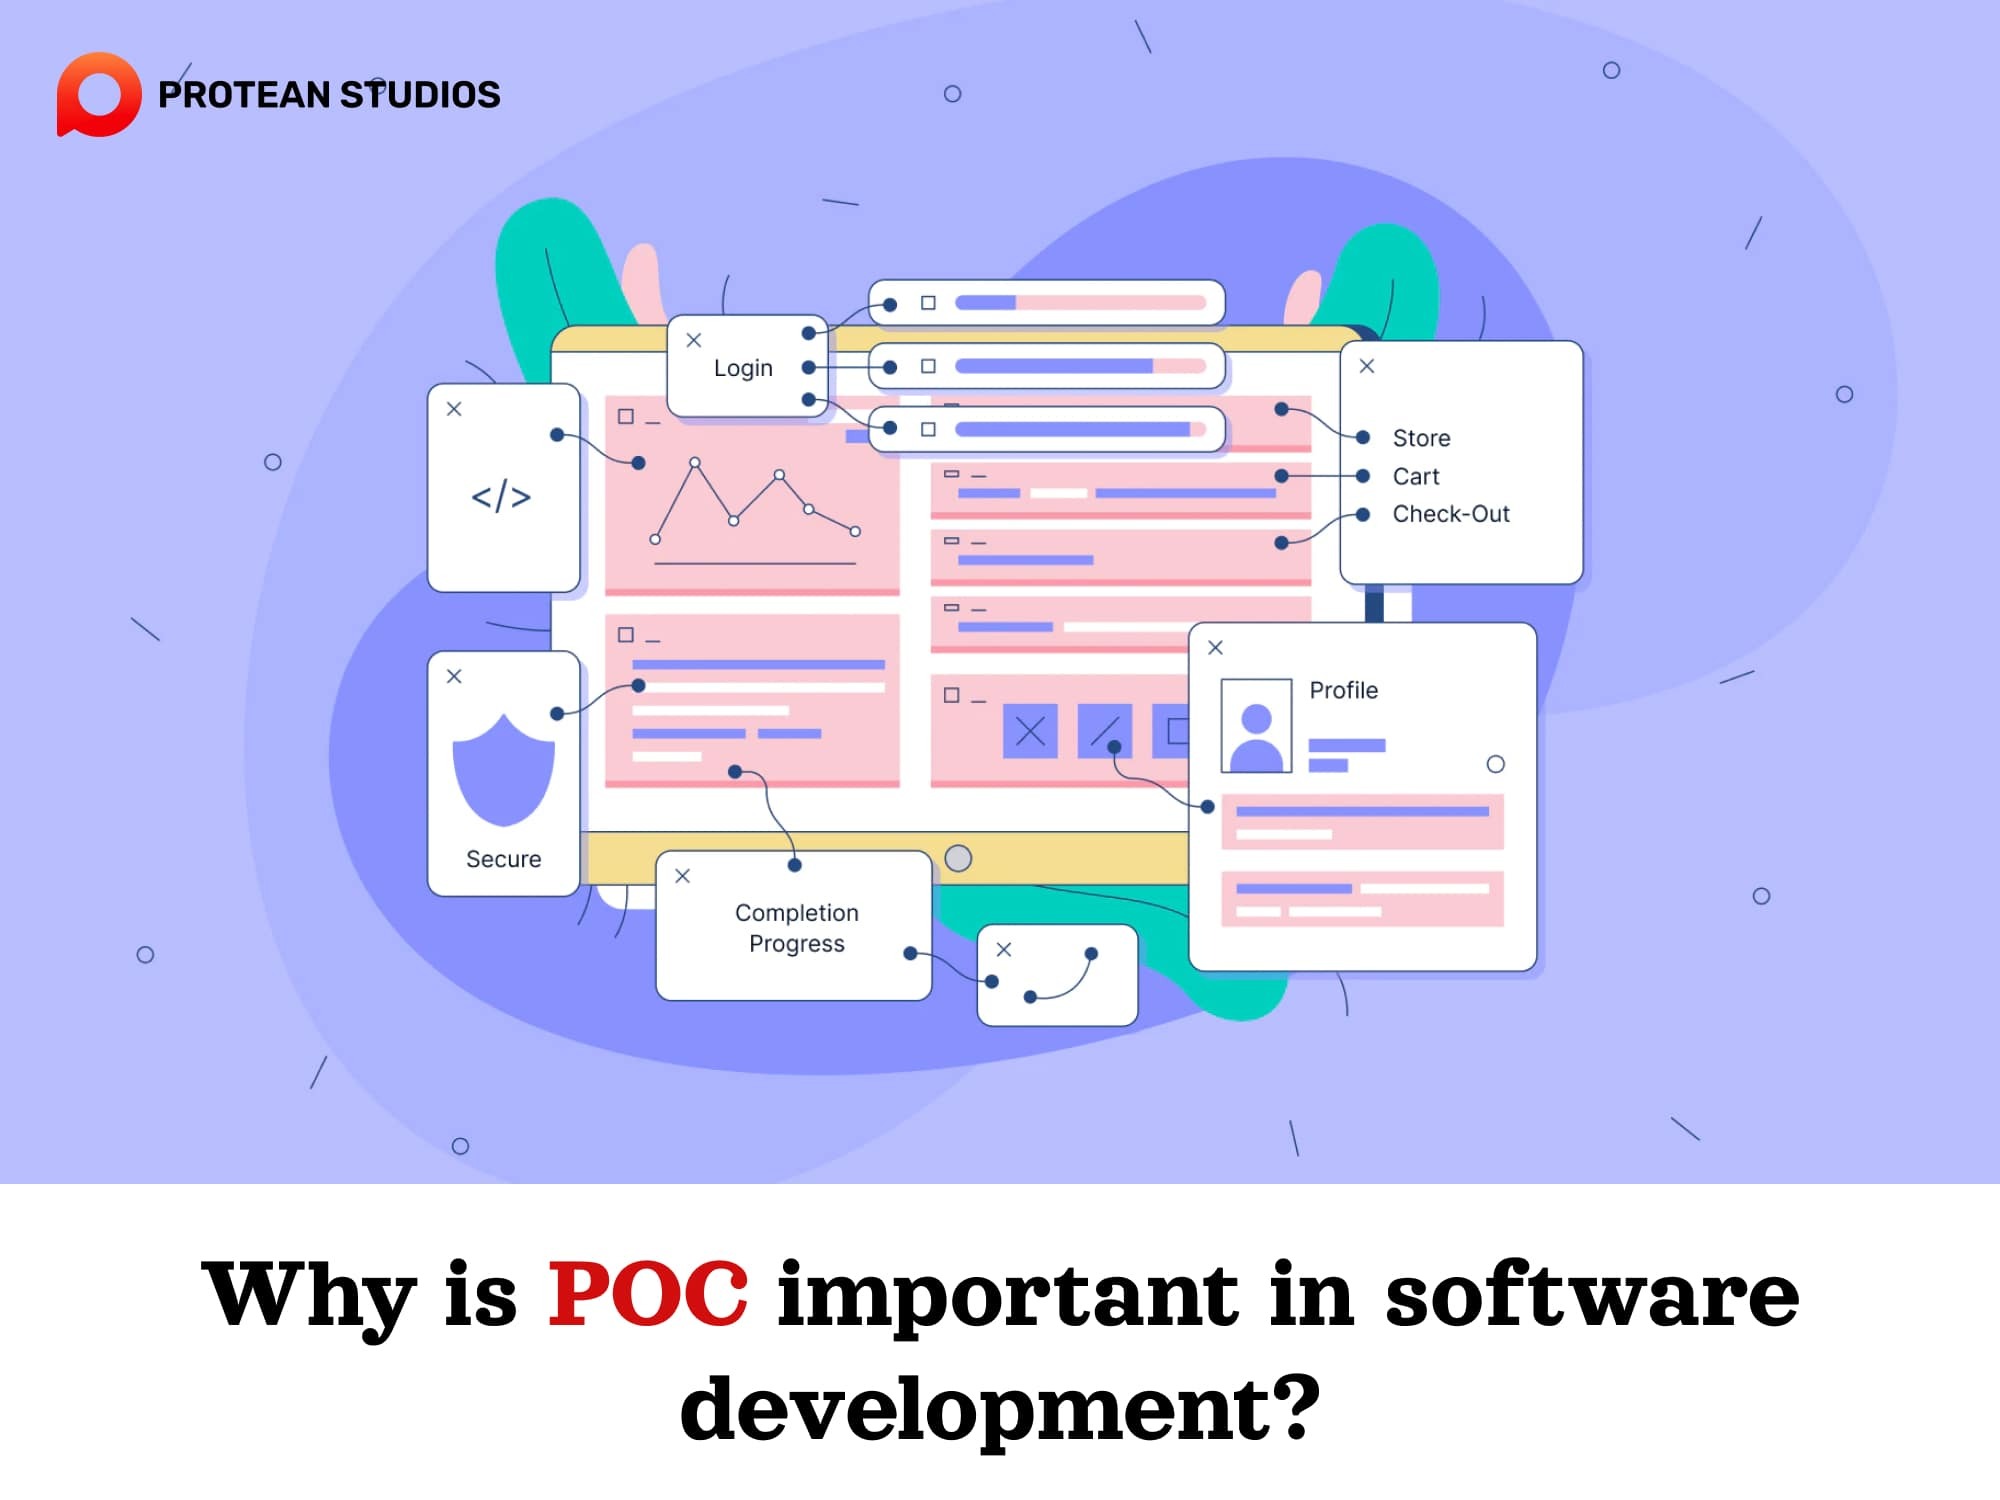 POC can help validate software product’s feasibility